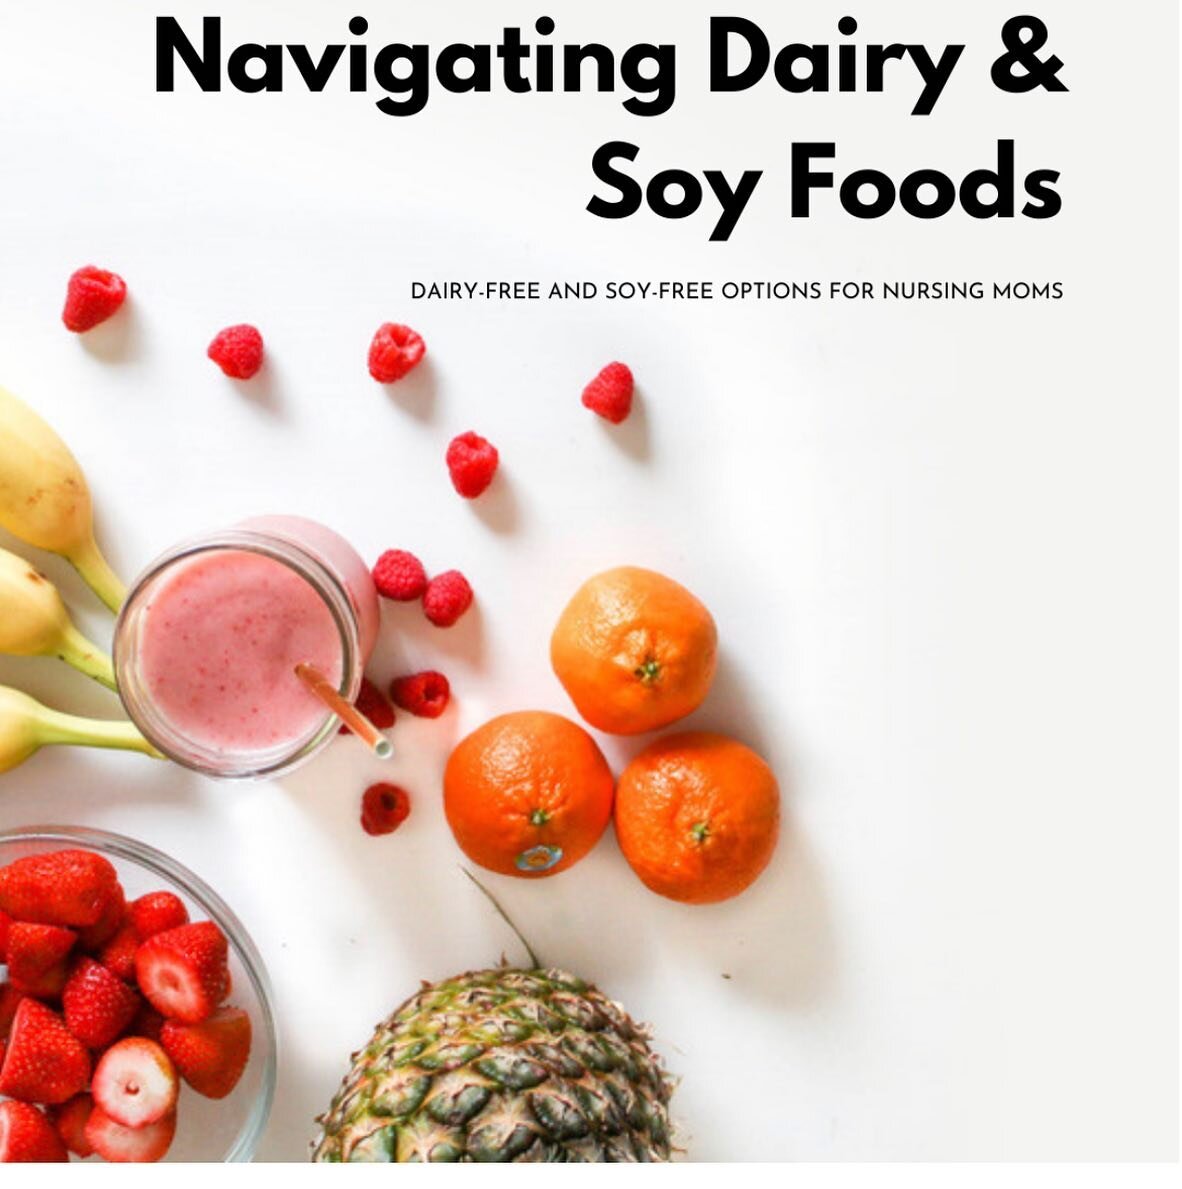 Newest ebook available! 

This guide is intended for women who need to follow a soy and dairy free diet due to baby sensitivities or intolerances while breastfeeding. This is can be a very difficult task and the reason many women choose to stop breas